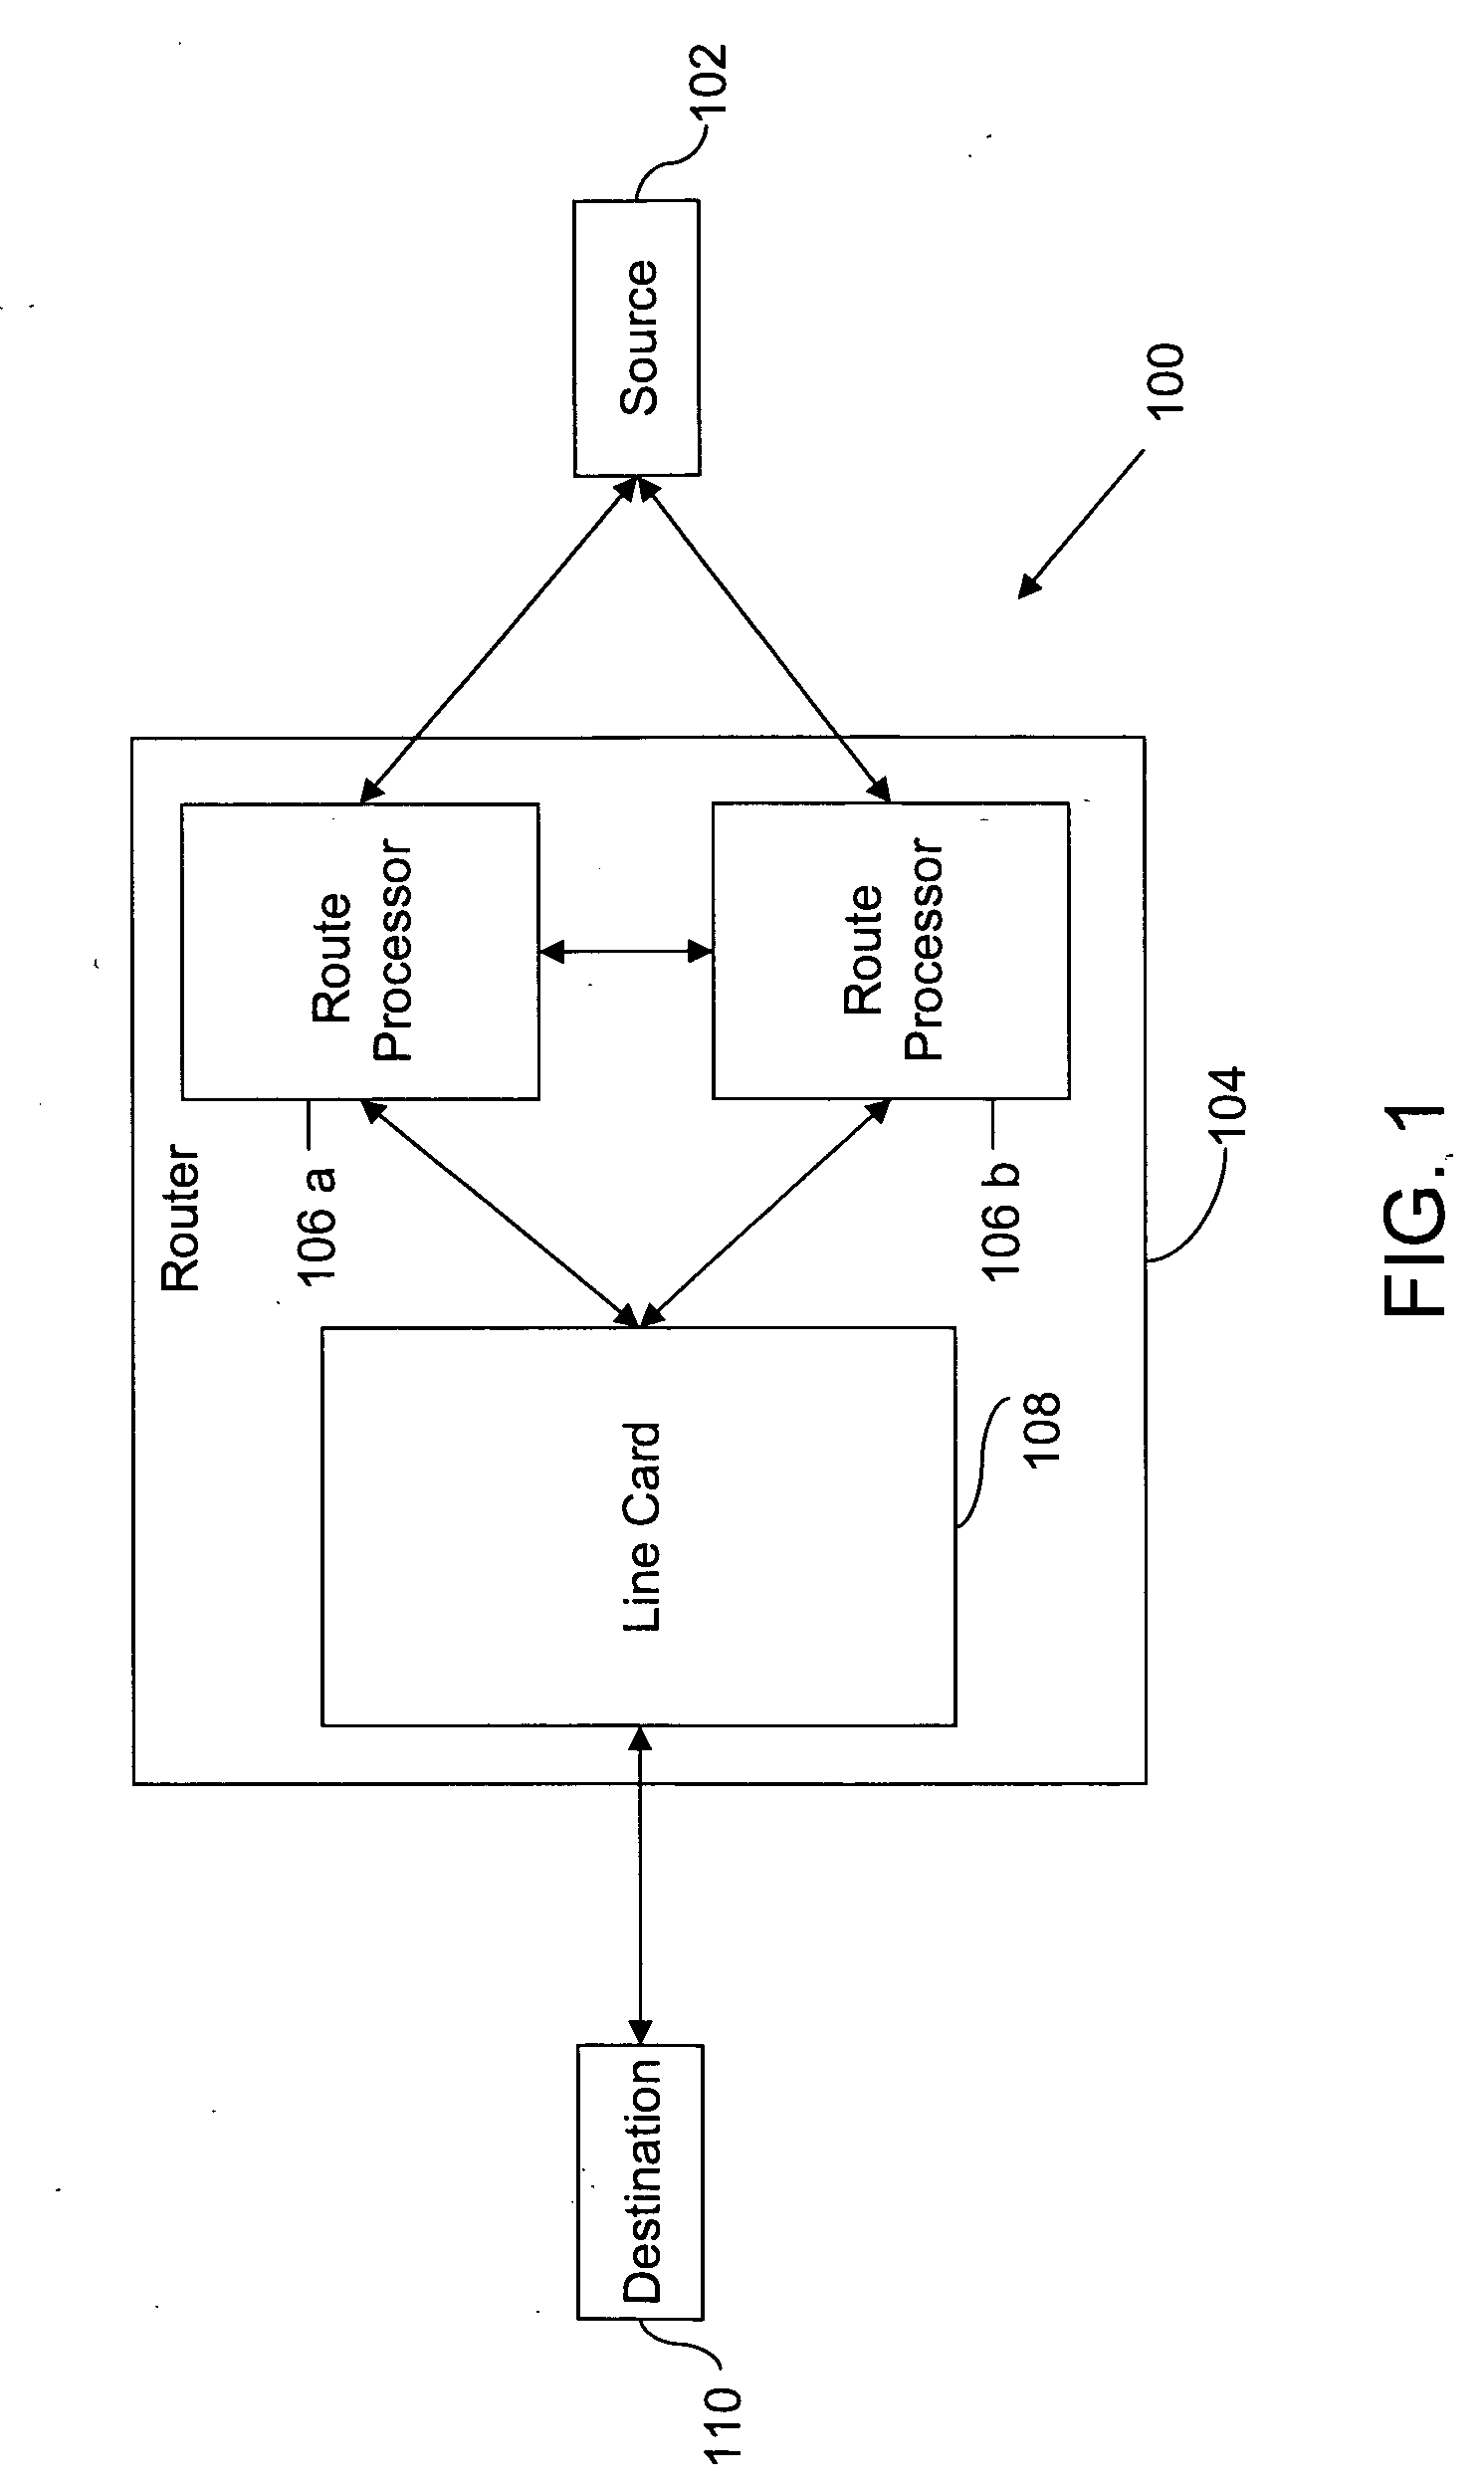 Method and system for minimizing disruption during in-service software upgrade